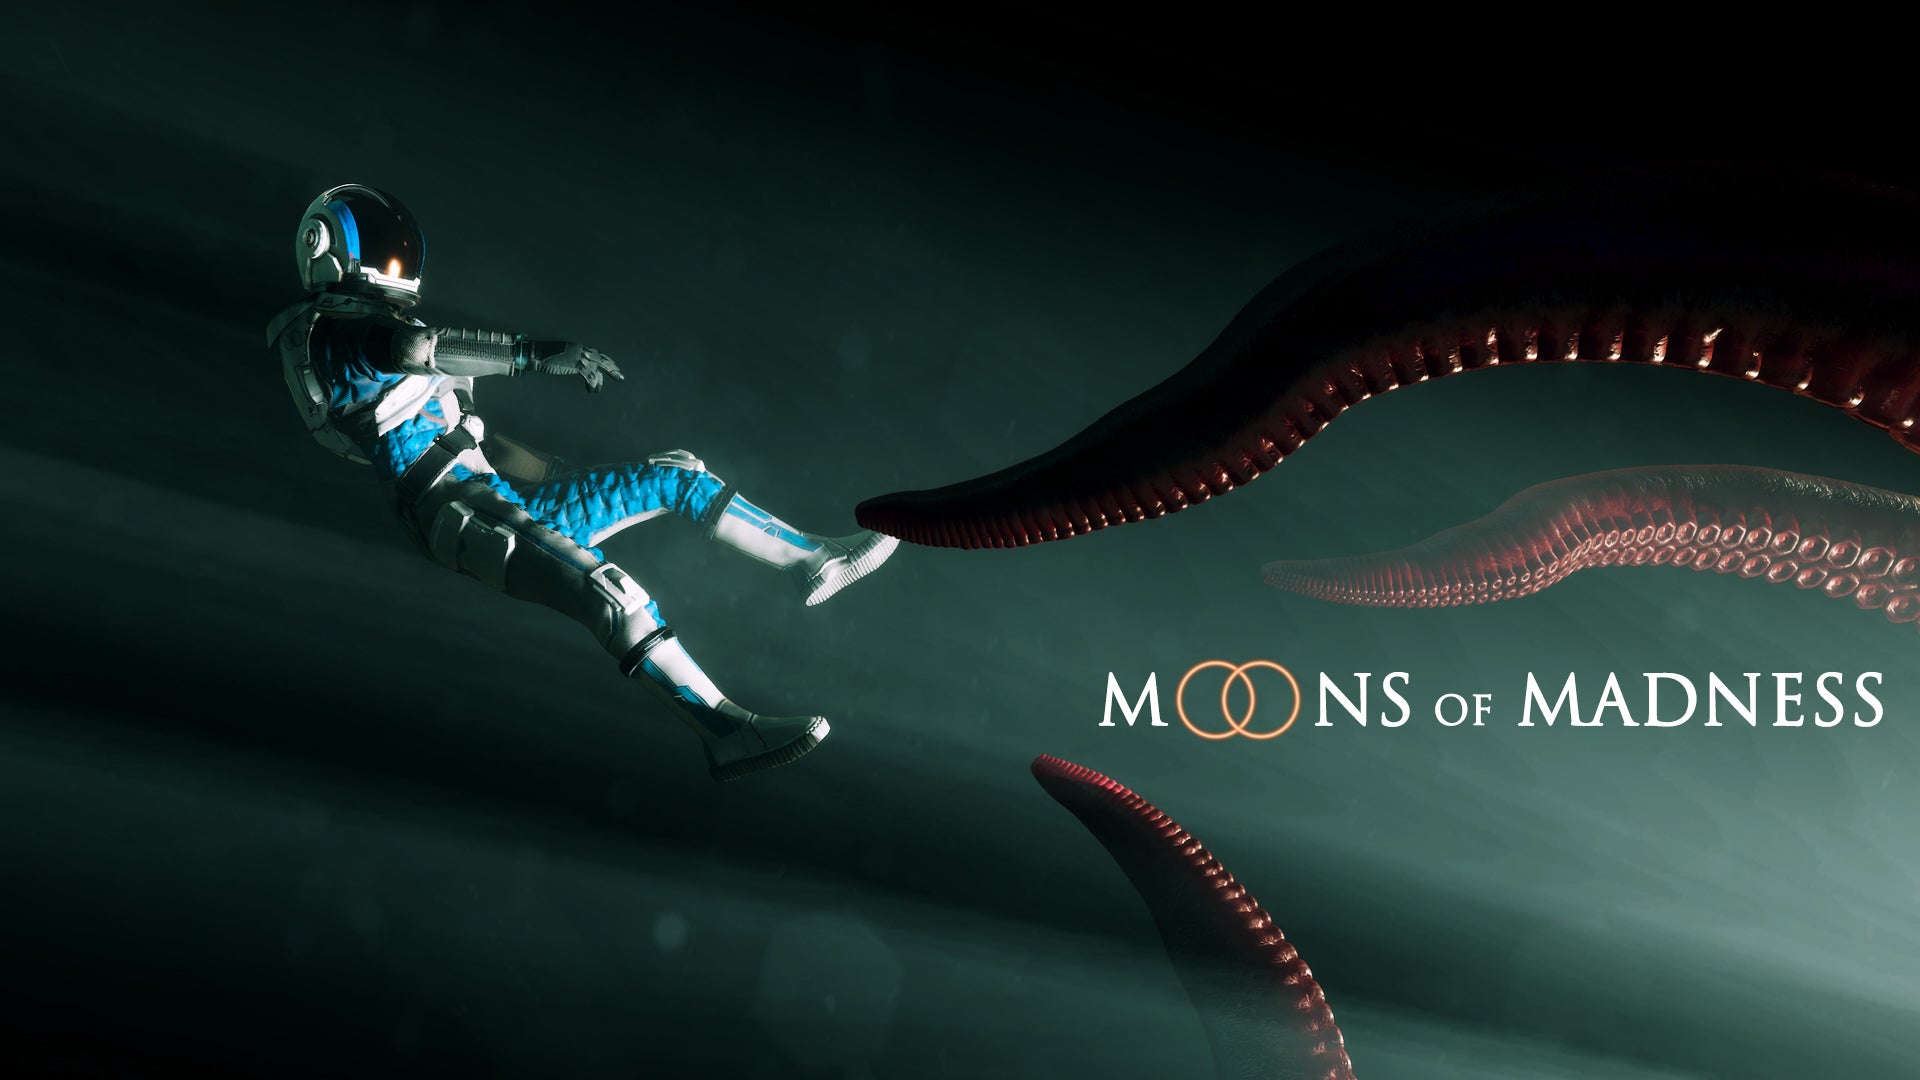 Image for Moons of Madness is a sci-fi horror game set in the Secret World universe